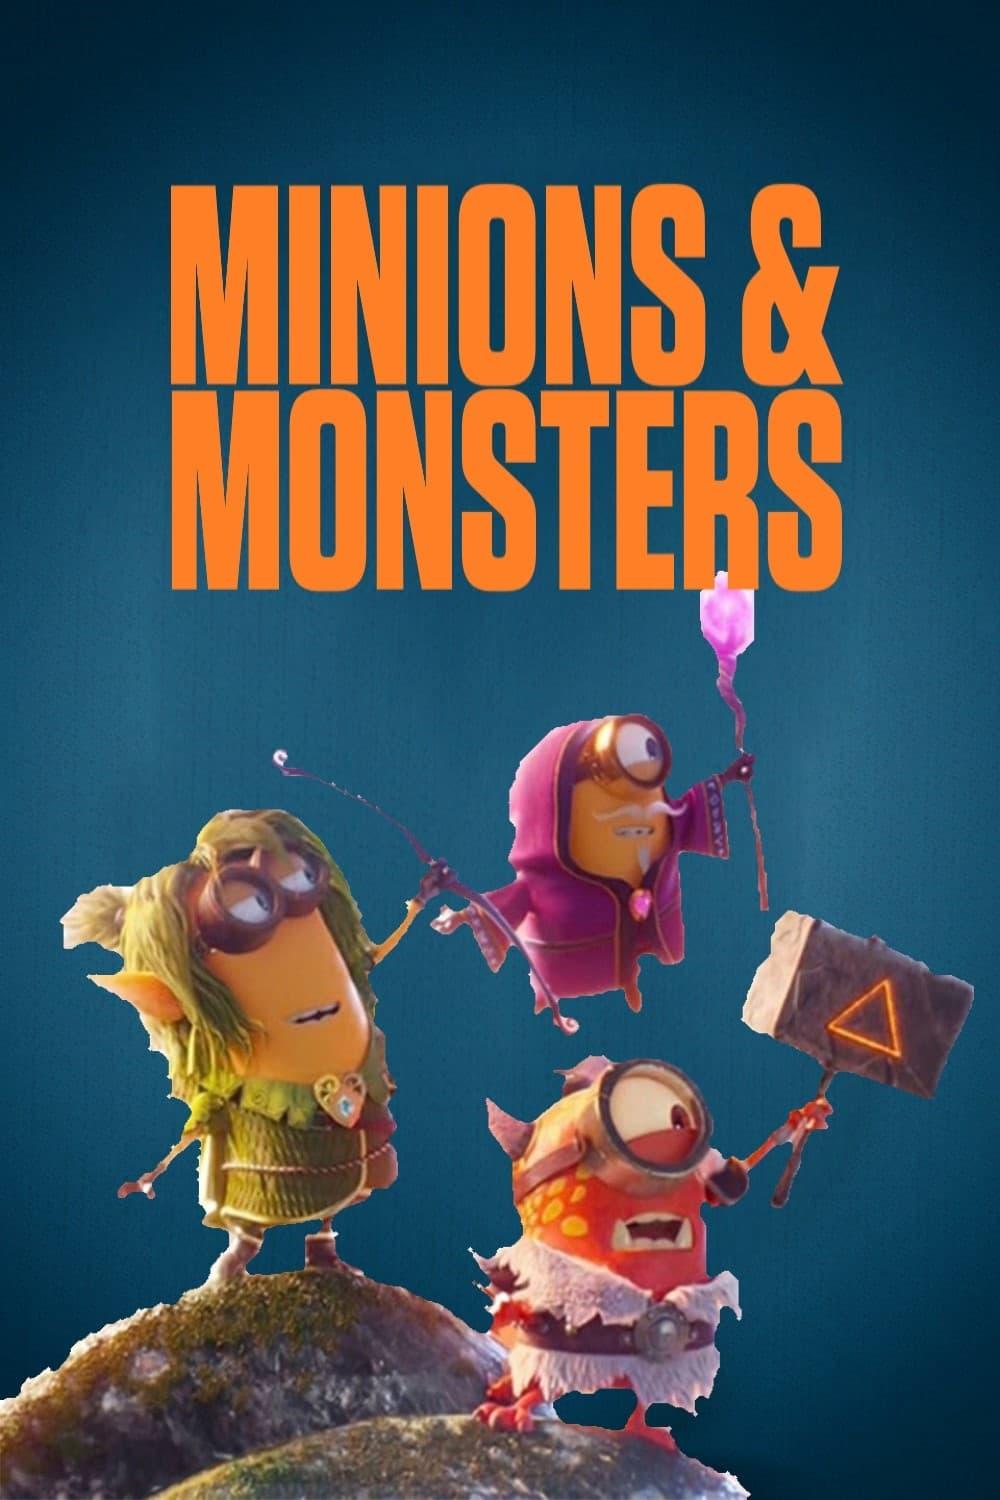 Minions & Monsters poster